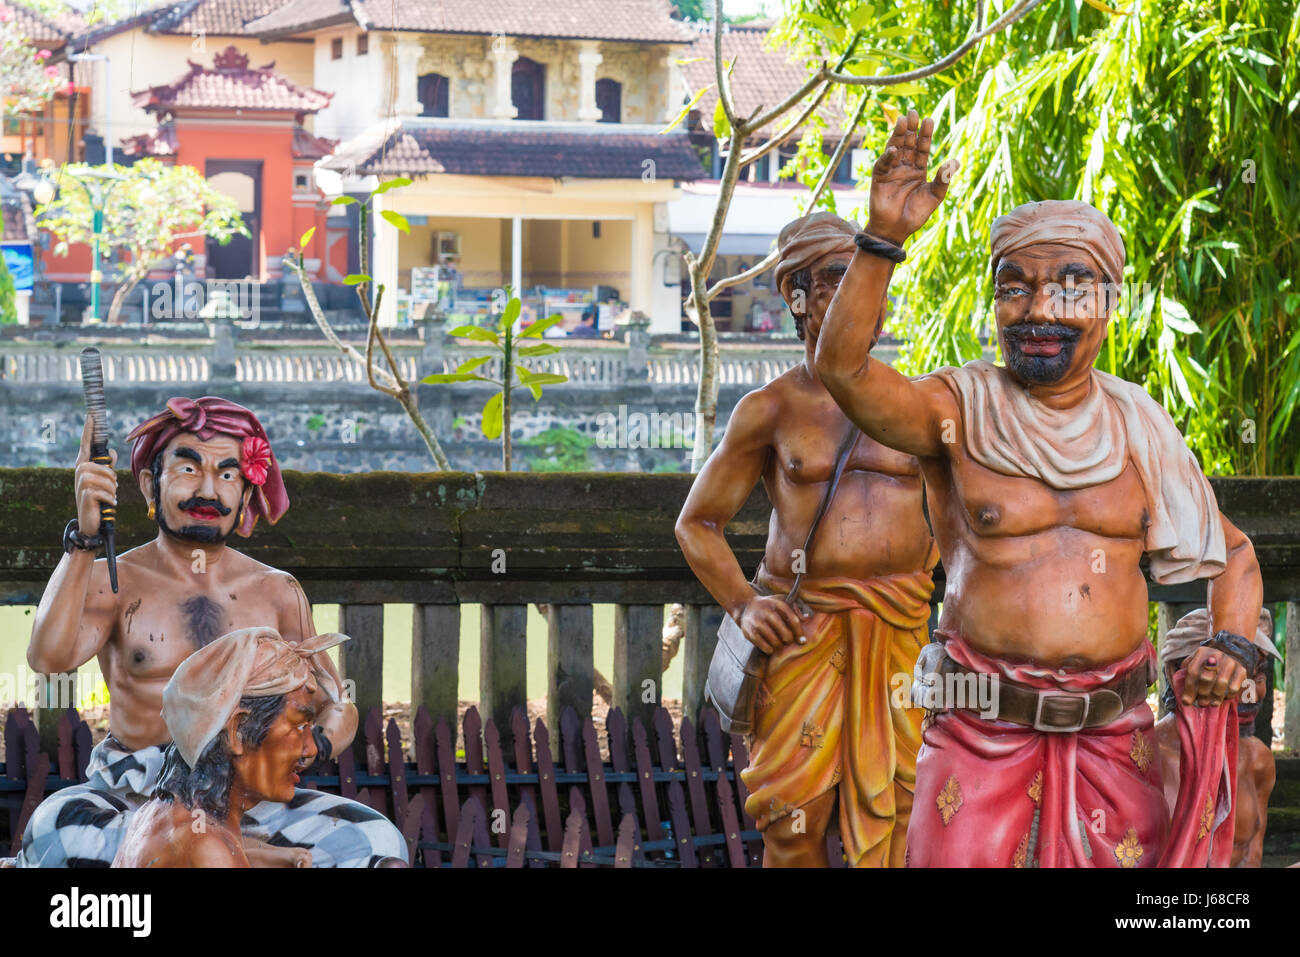 Bali, Indonesia - April 30, 2017 : Traditional statues at Pura Taman Ayun temple, a compound of traditional Balinese temple and garden in Mengwi, Badu Stock Photo